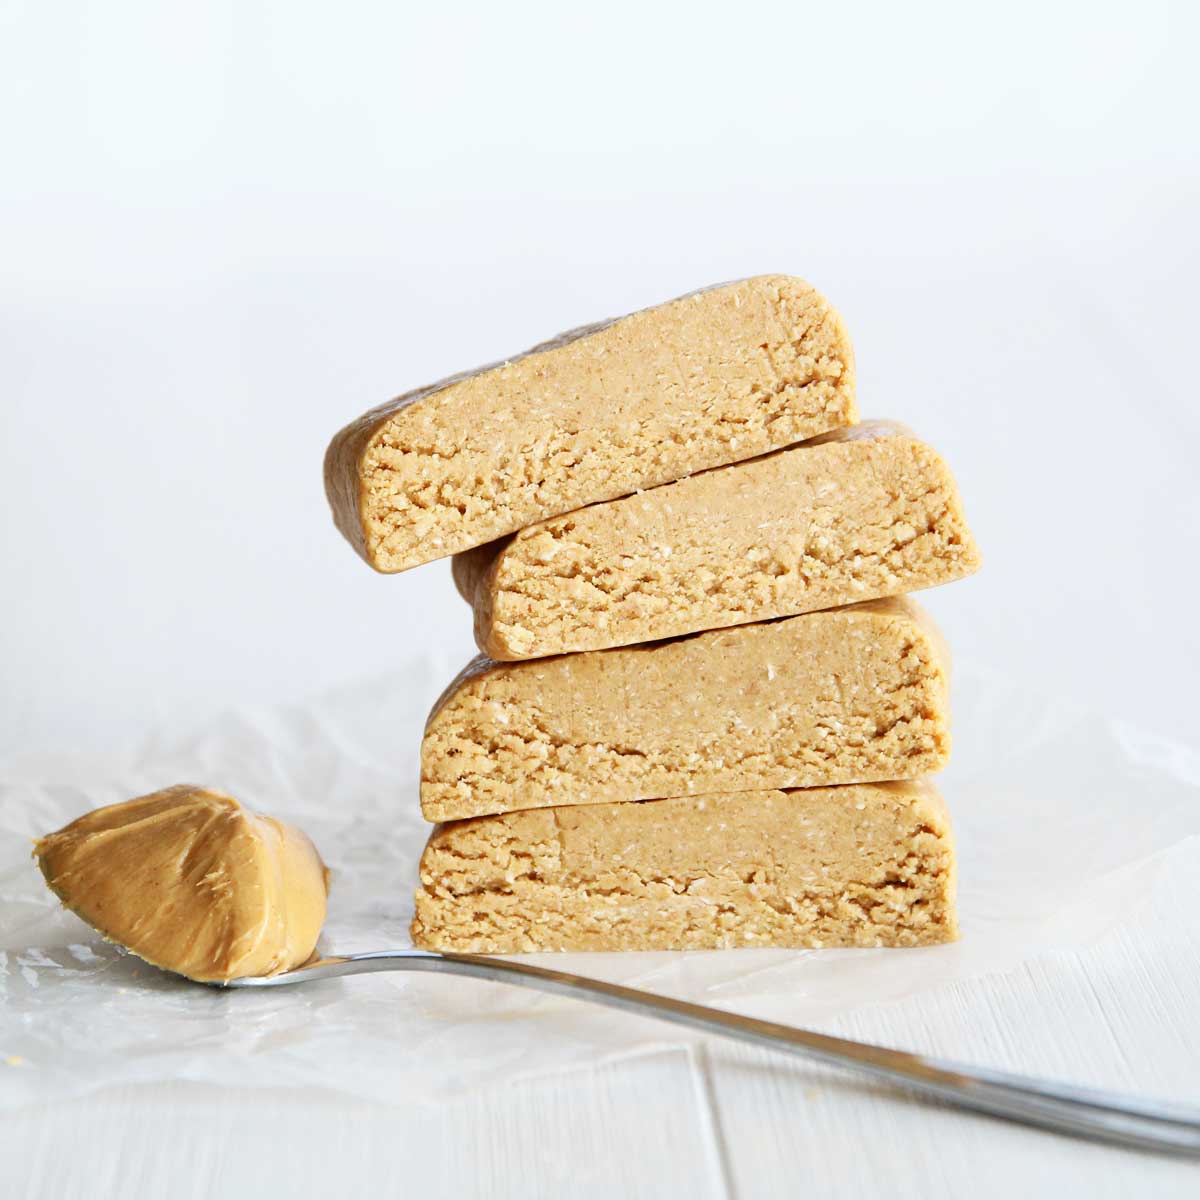 4-Ingredient Peanut Butter Oatmeal Protein Bars (Healthy, GF and Vegan) - Red Bean Mochi Cake